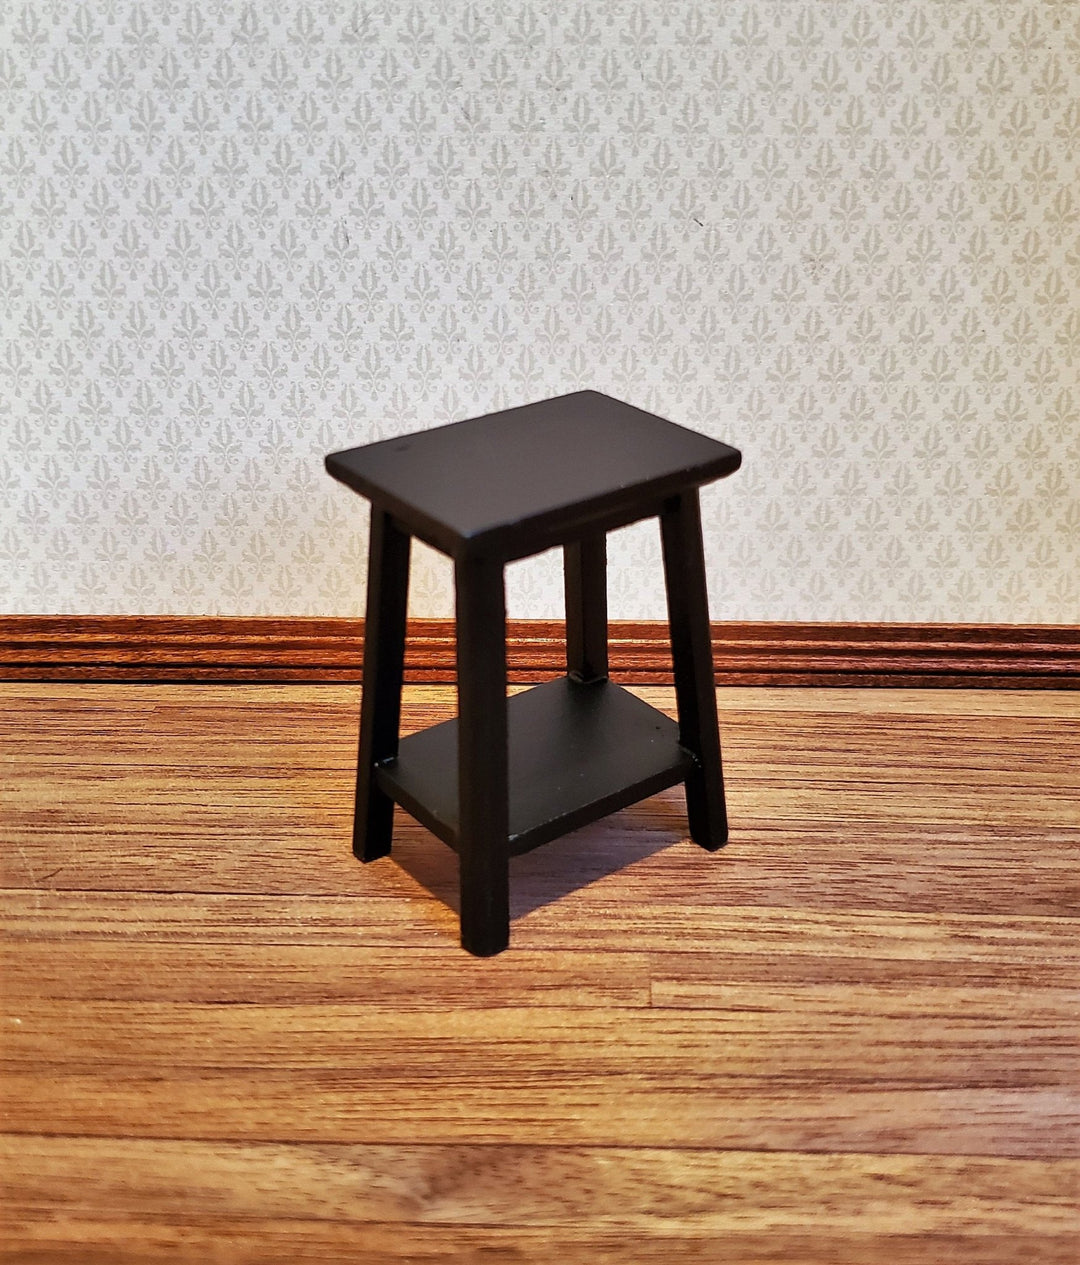 Dollhouse Miniature Fern or Plant Stand Side Table Black 1:12 Scale Furniture - Miniature Crush